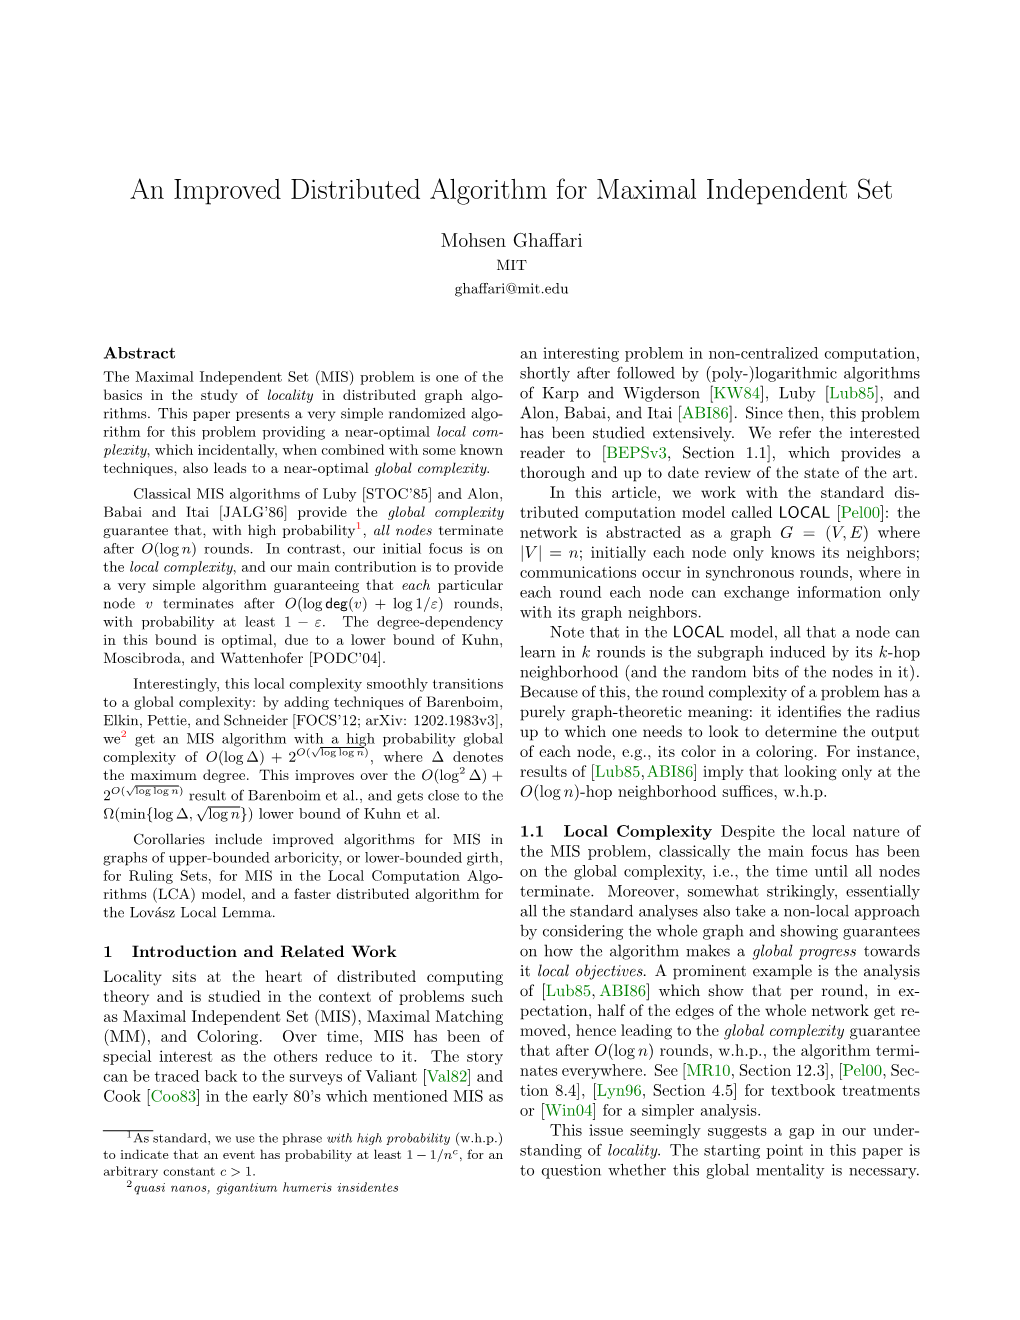 An Improved Distributed Algorithm for Maximal Independent Set